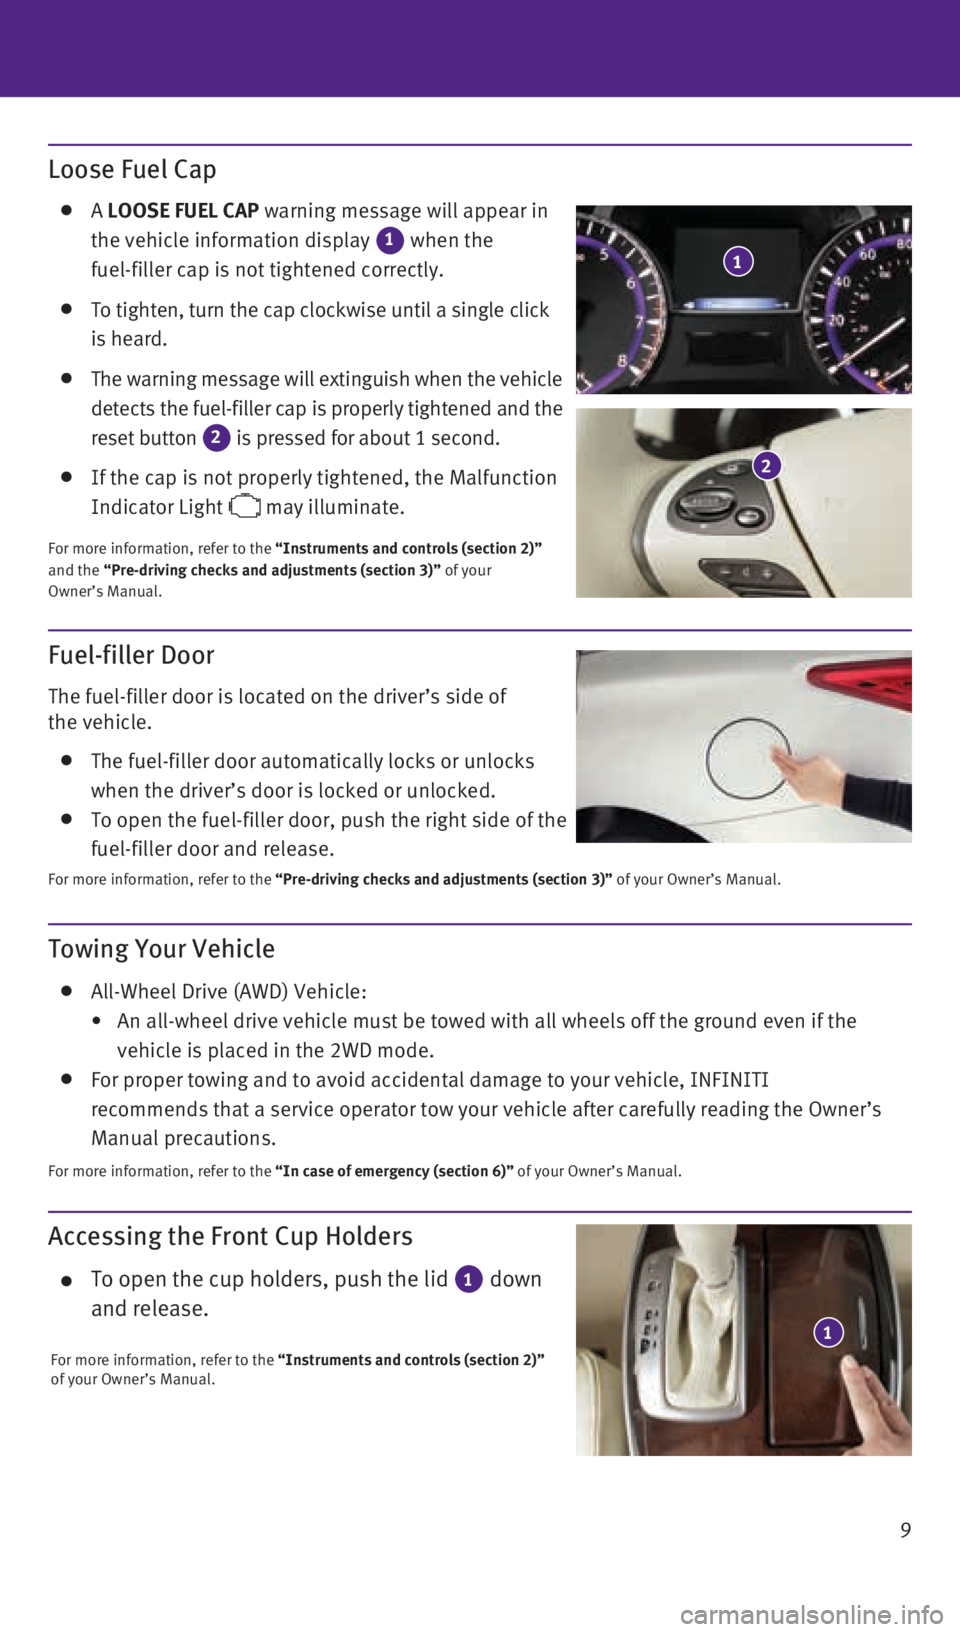 INFINITI QX60 2015  Quick Reference Guide 9
Accessing the Front Cup Holders
    To open the cup holders, push the lid 1 down 
and release.
For more information, refer to the “Instruments and controls (section 2)”  
of your Owner’s Manua